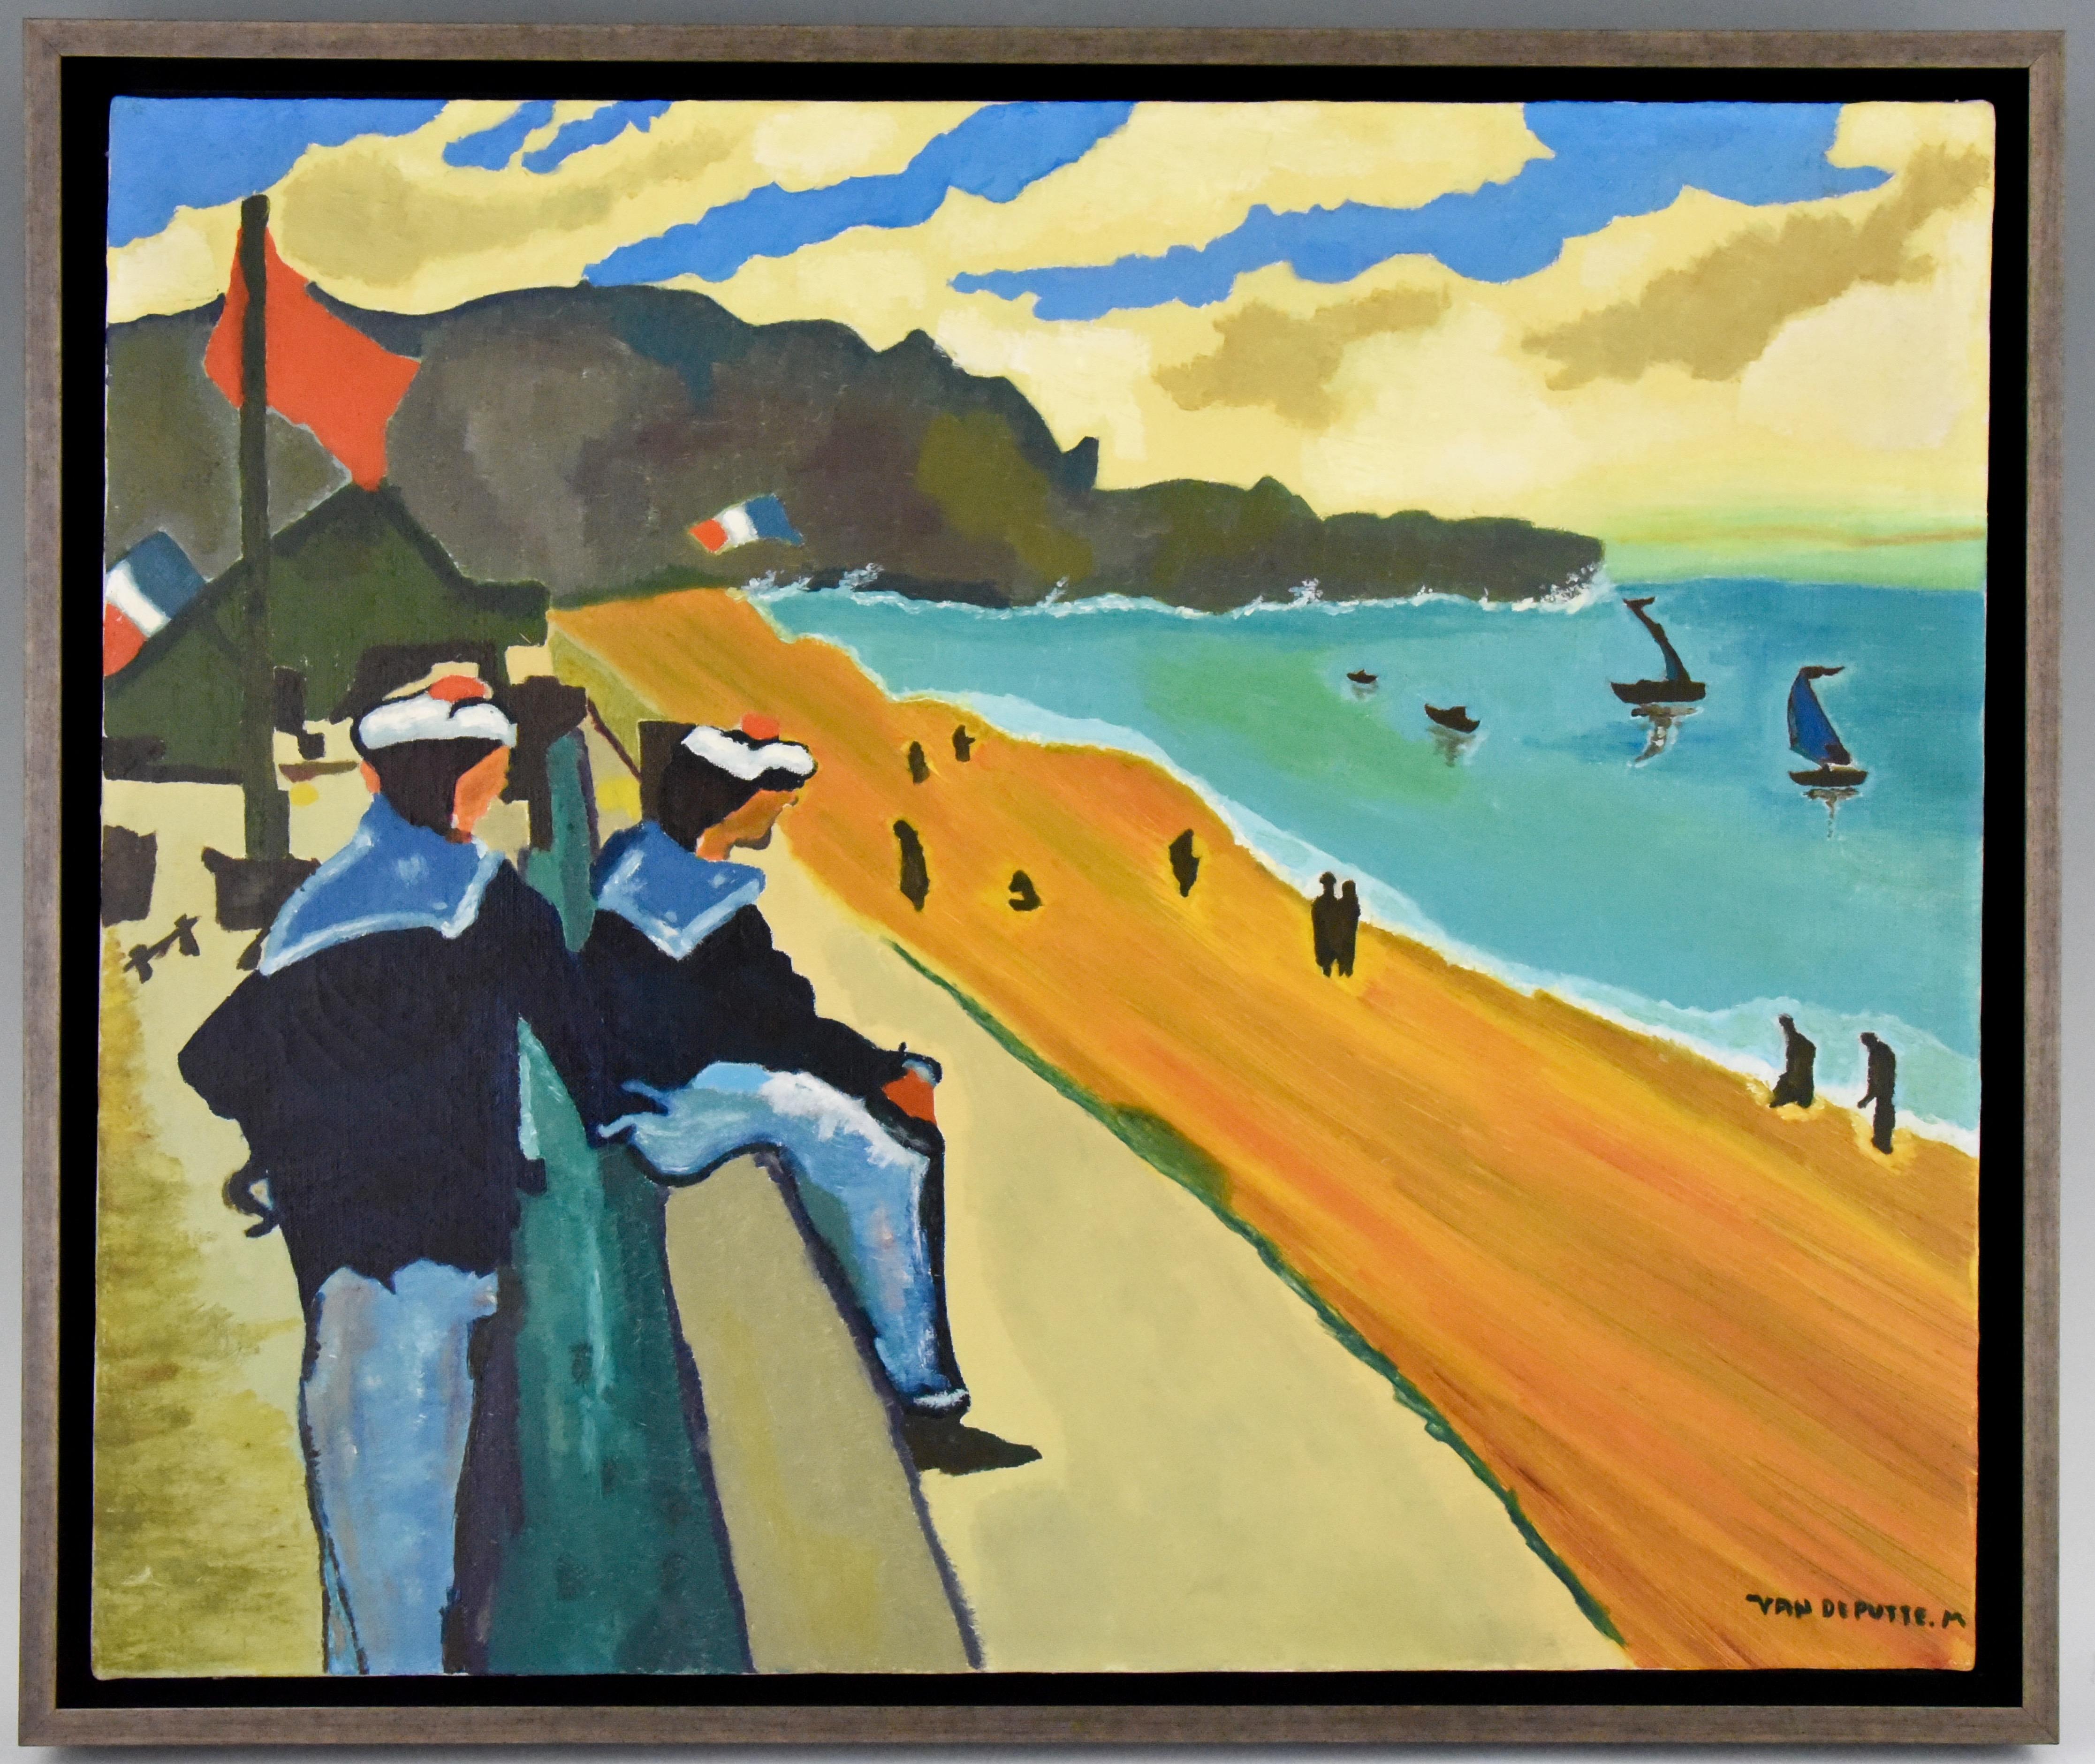 Colorful midcentury painting of the French Rivière. Two sailors on the boulevard overlooking the beach and the Mediteranian Sea. Signed M. van de Putte, 1960. Framed.